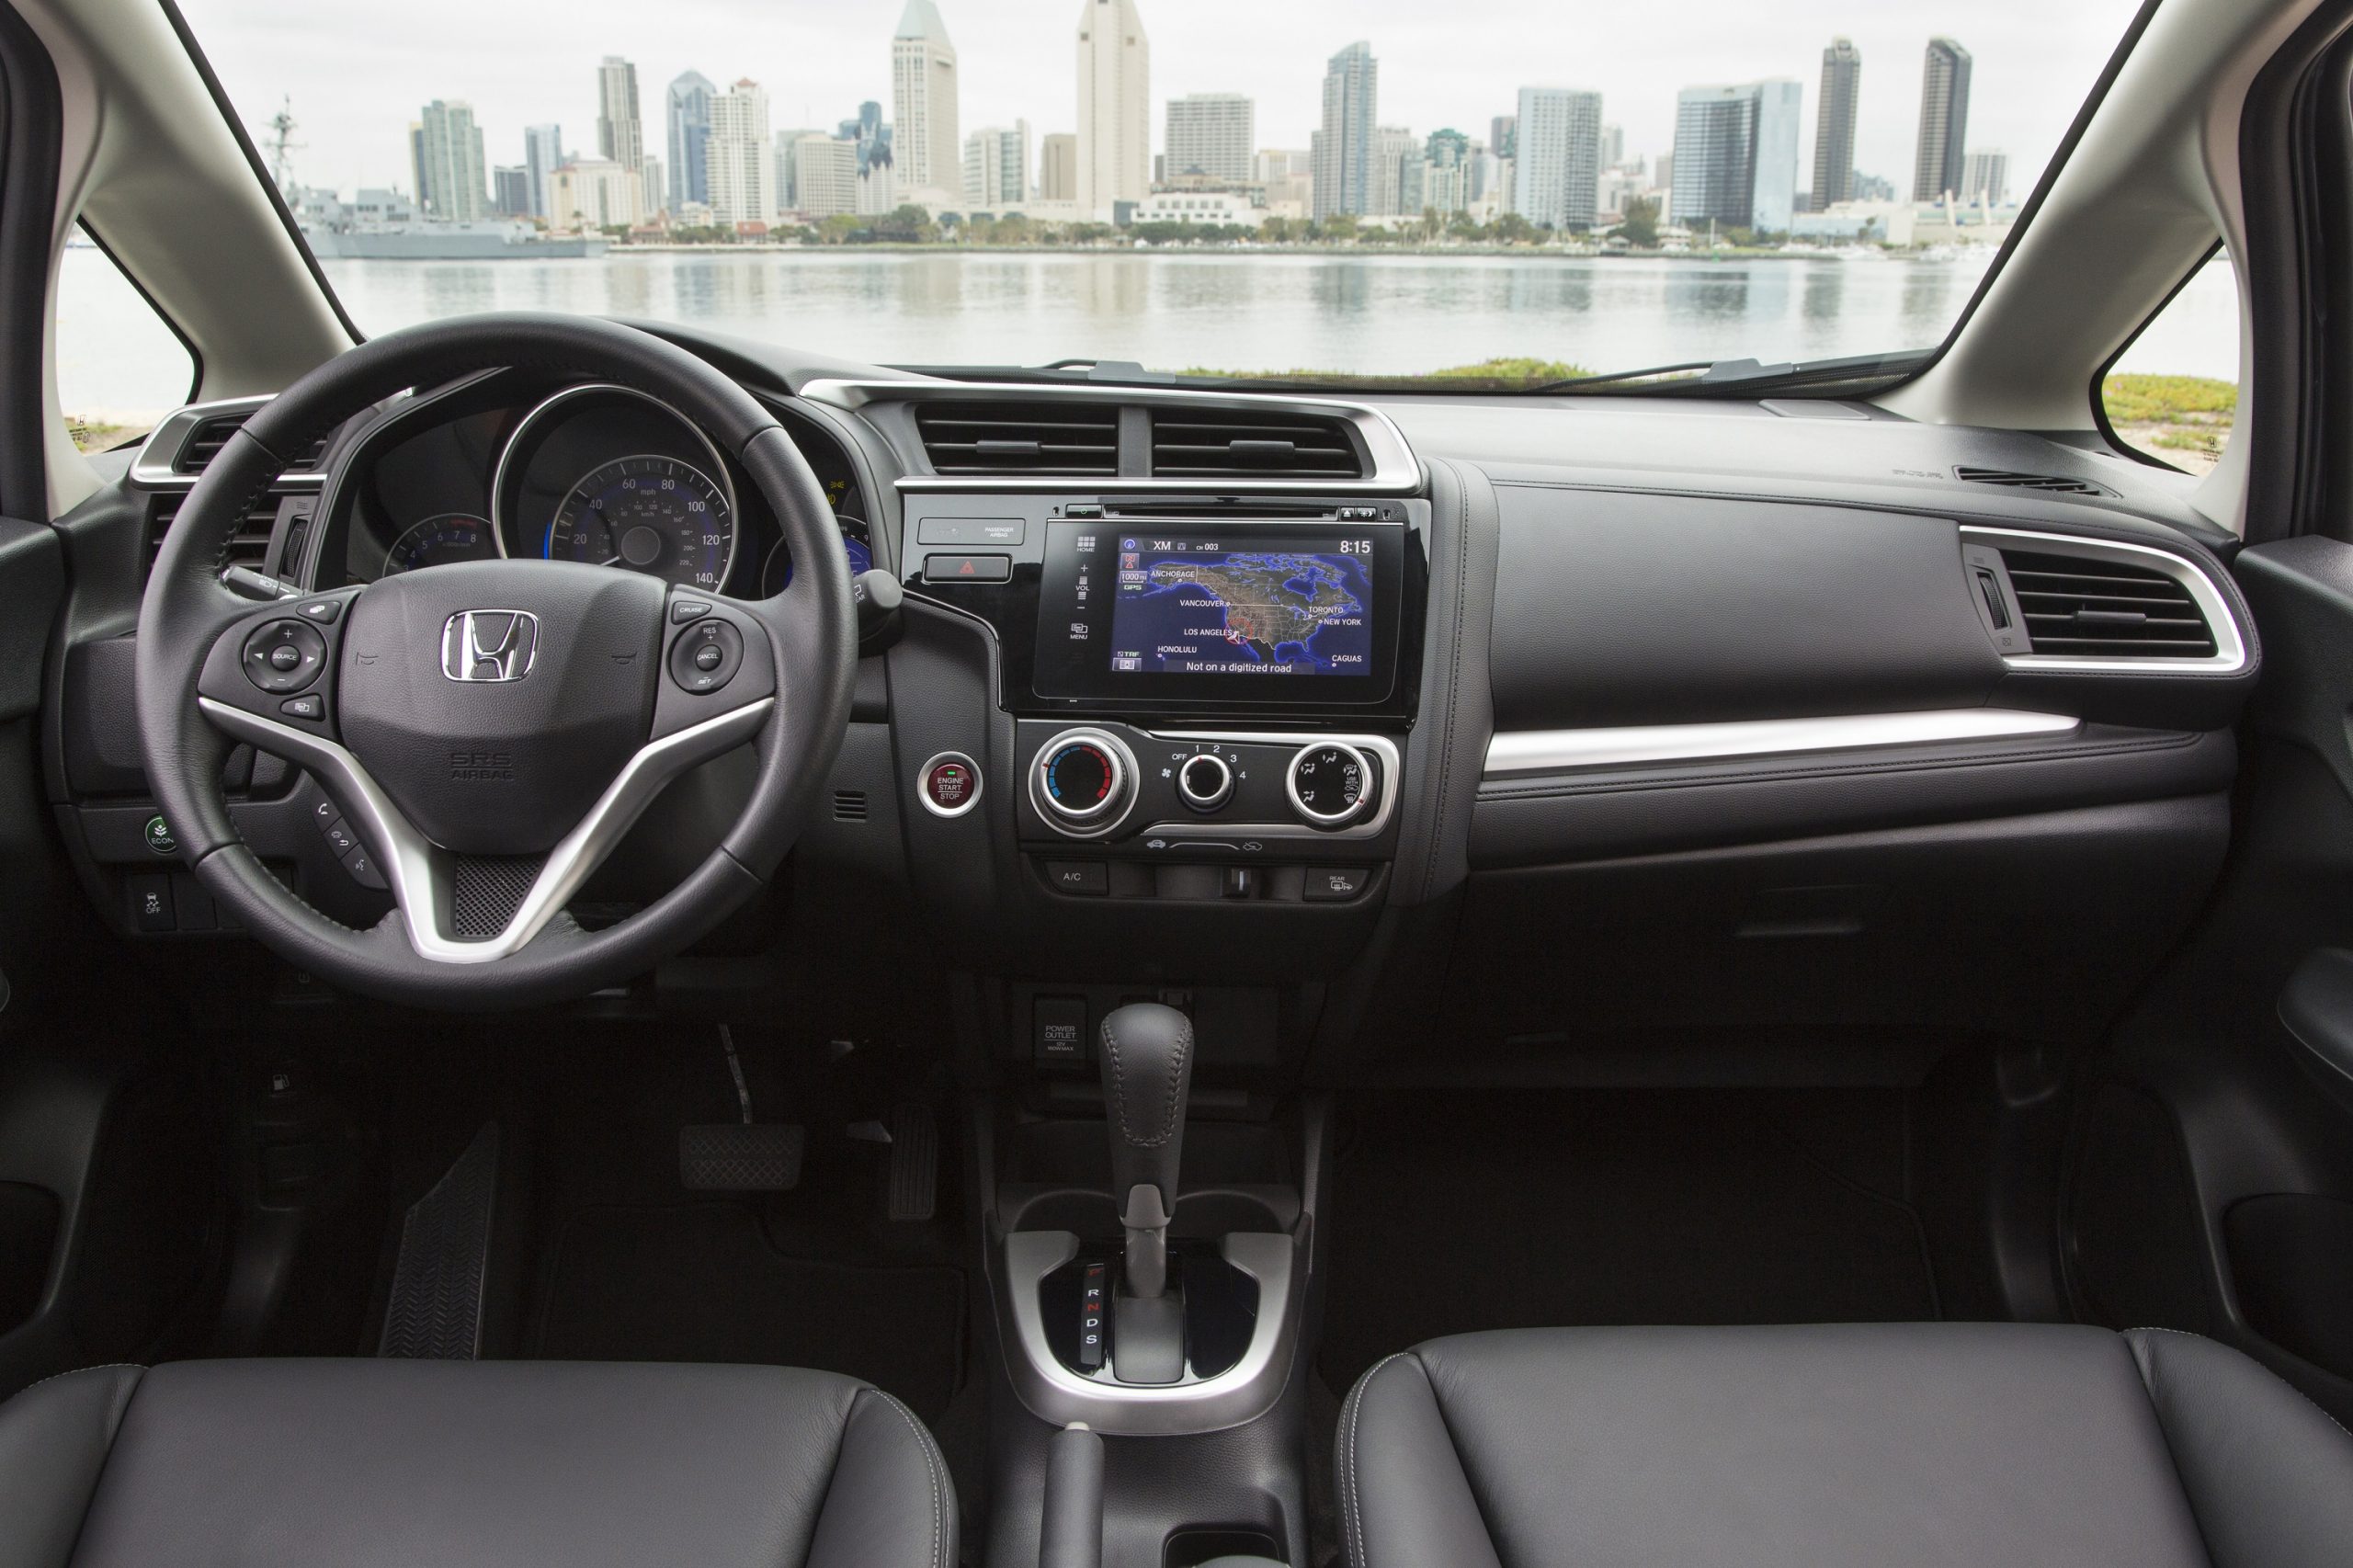 The interior of the 2015 Honda Fit with a conventional layout featuring the infotainment and climate control settings in the middle of the car